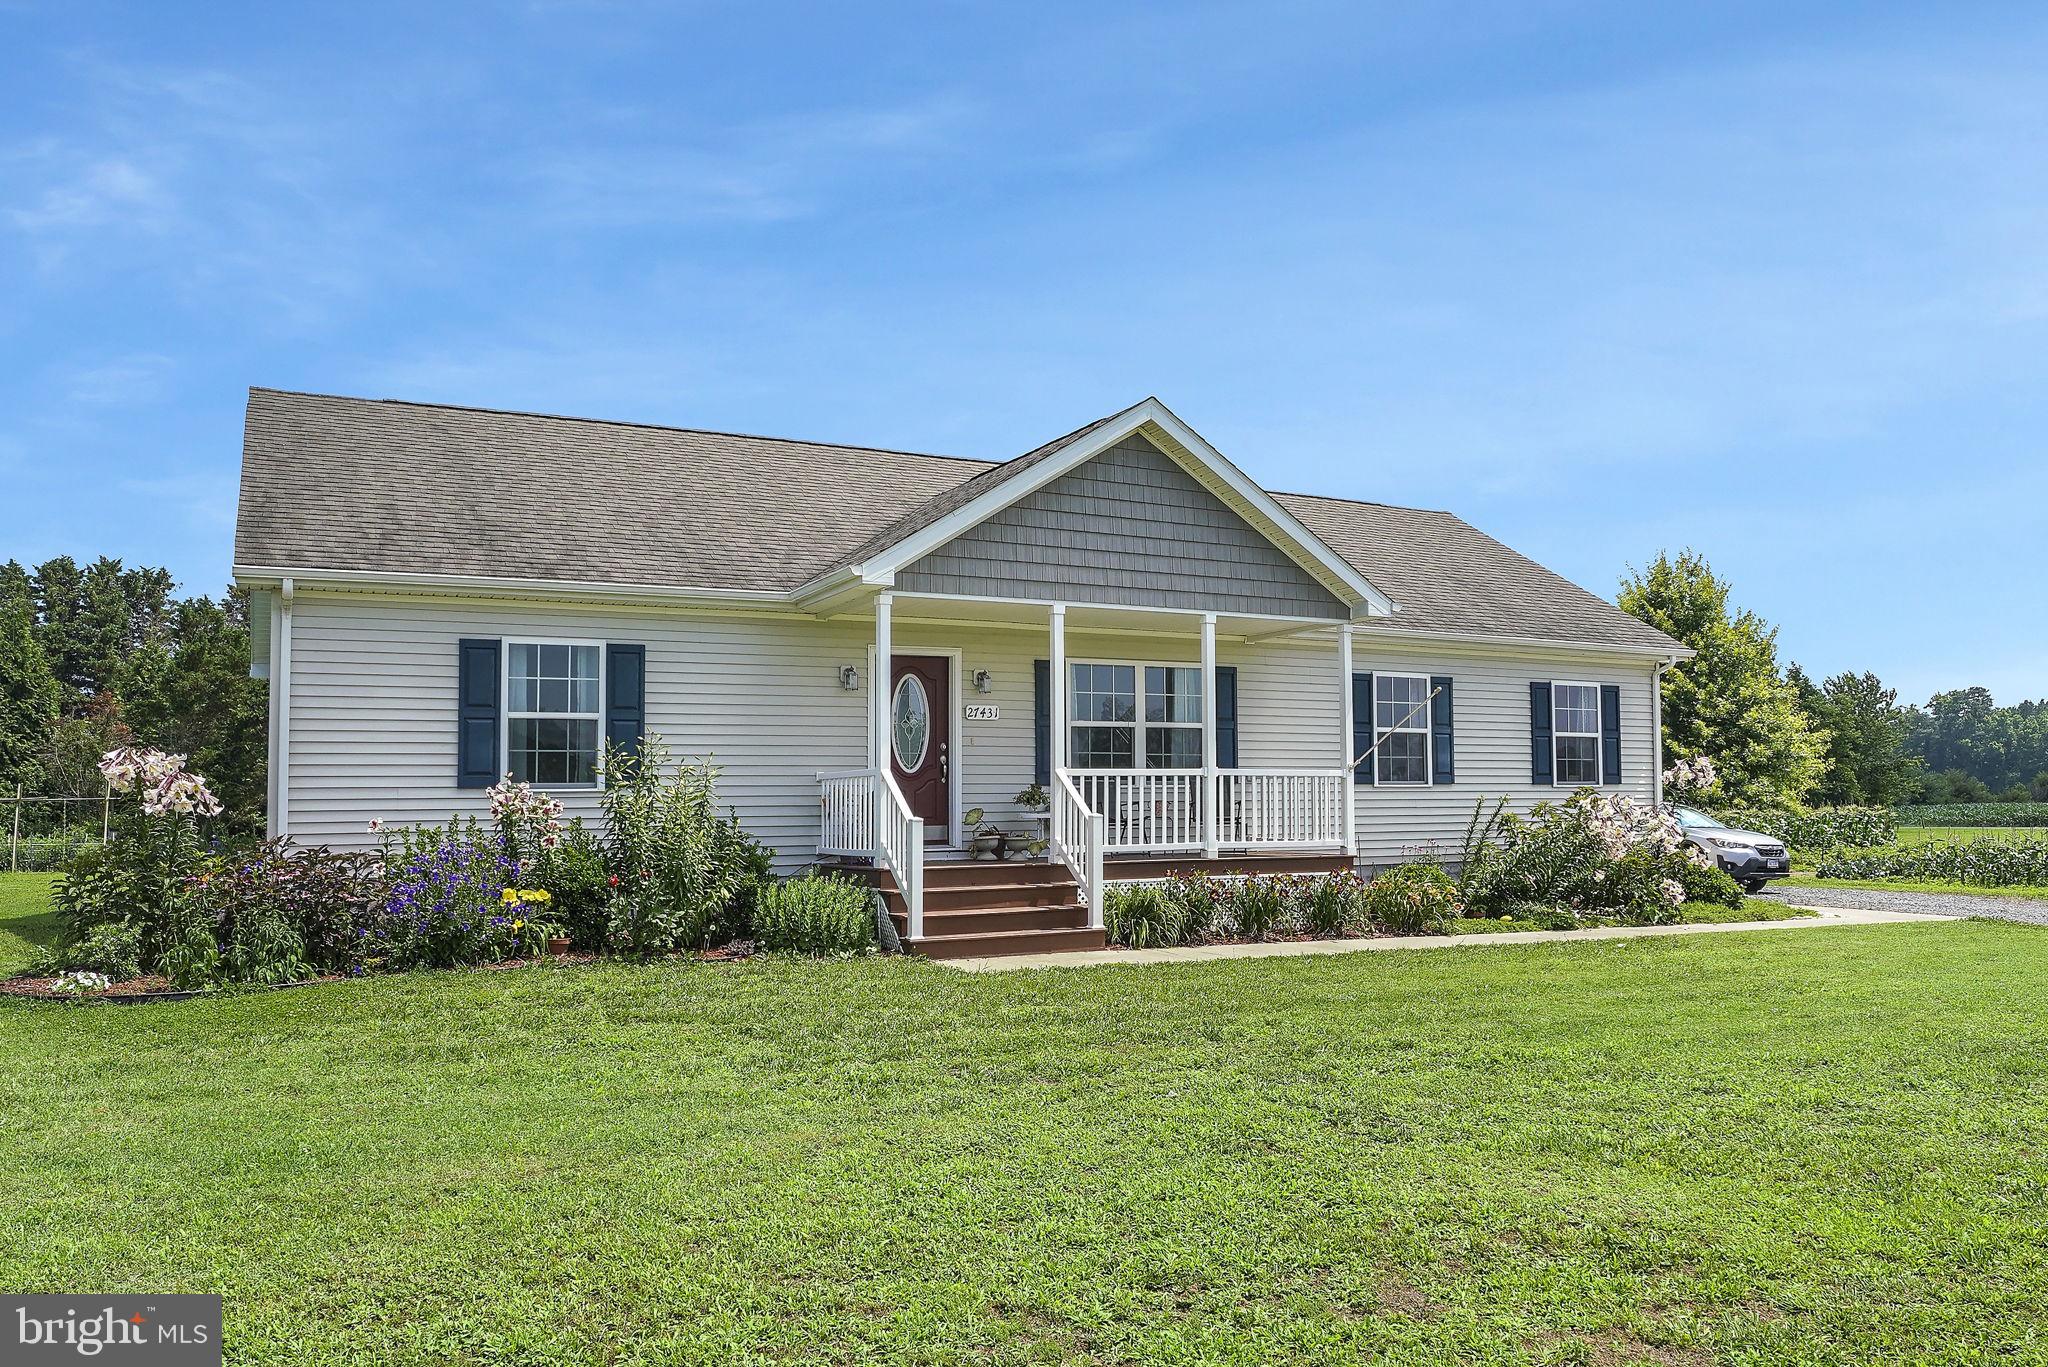 This stunning ranch-style home offers 3 bedrooms & 2 baths, providing ample space for comfortable li